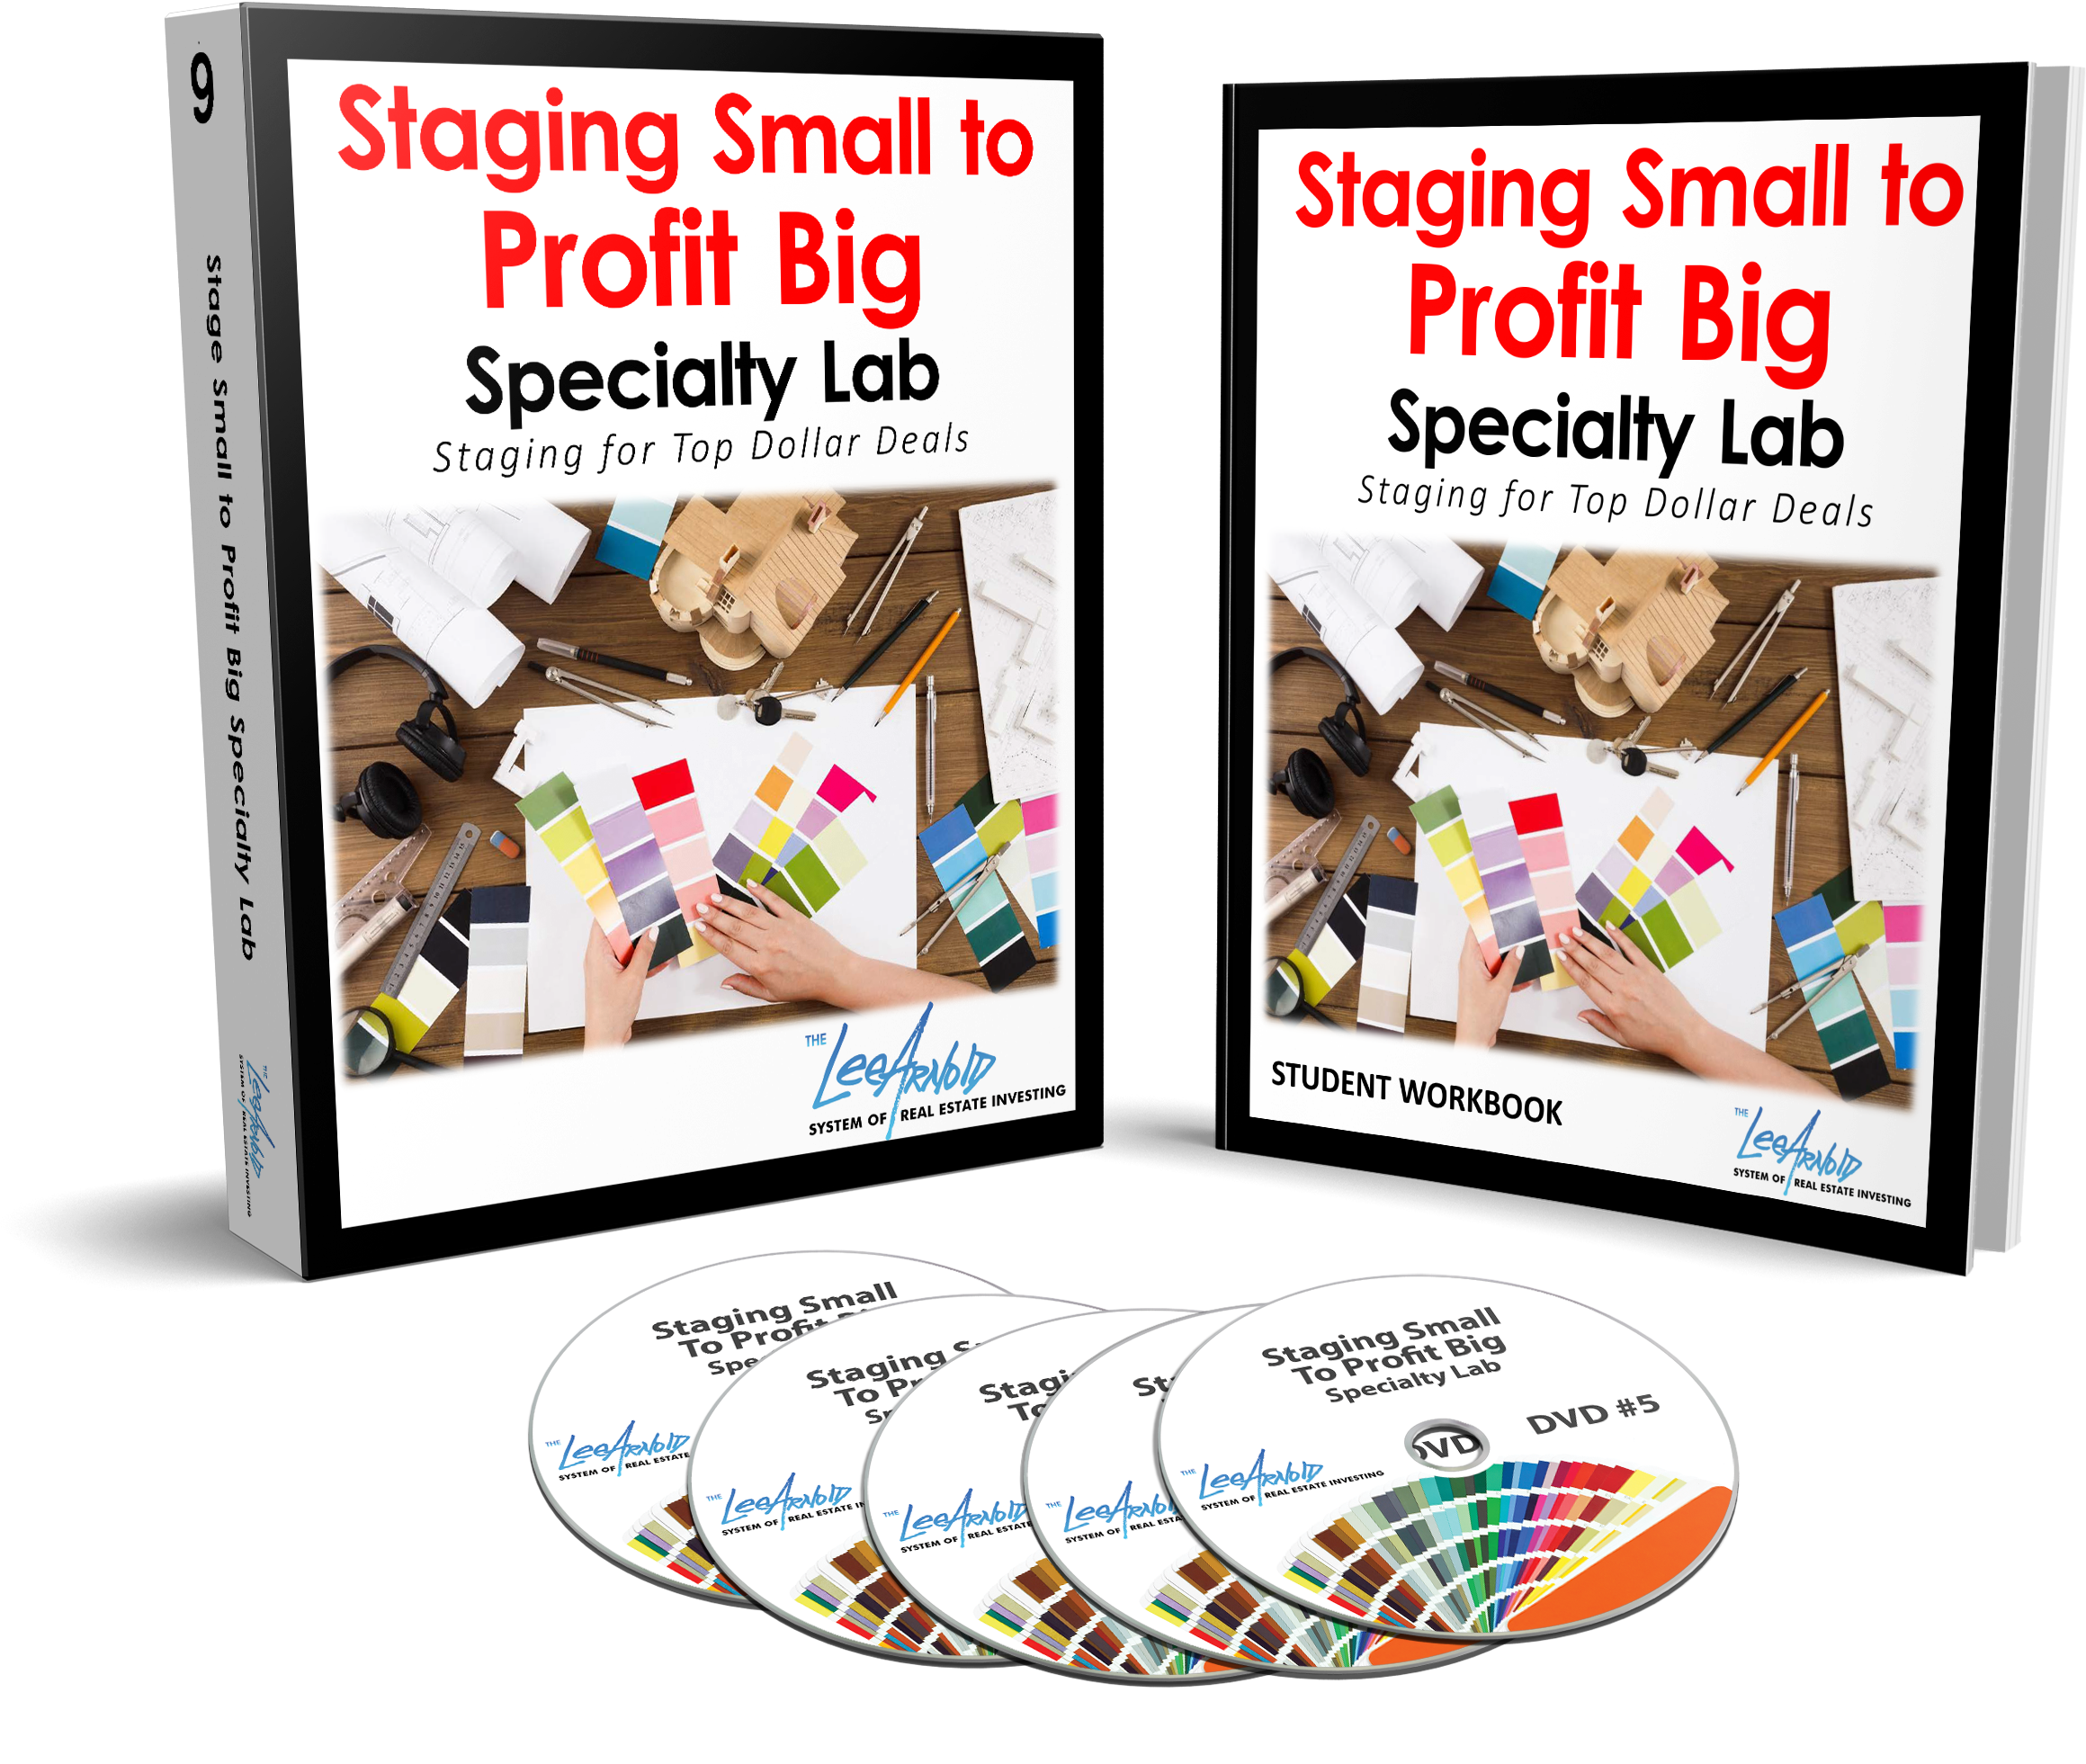 Staging Small to Profit Big Real Estate Lab